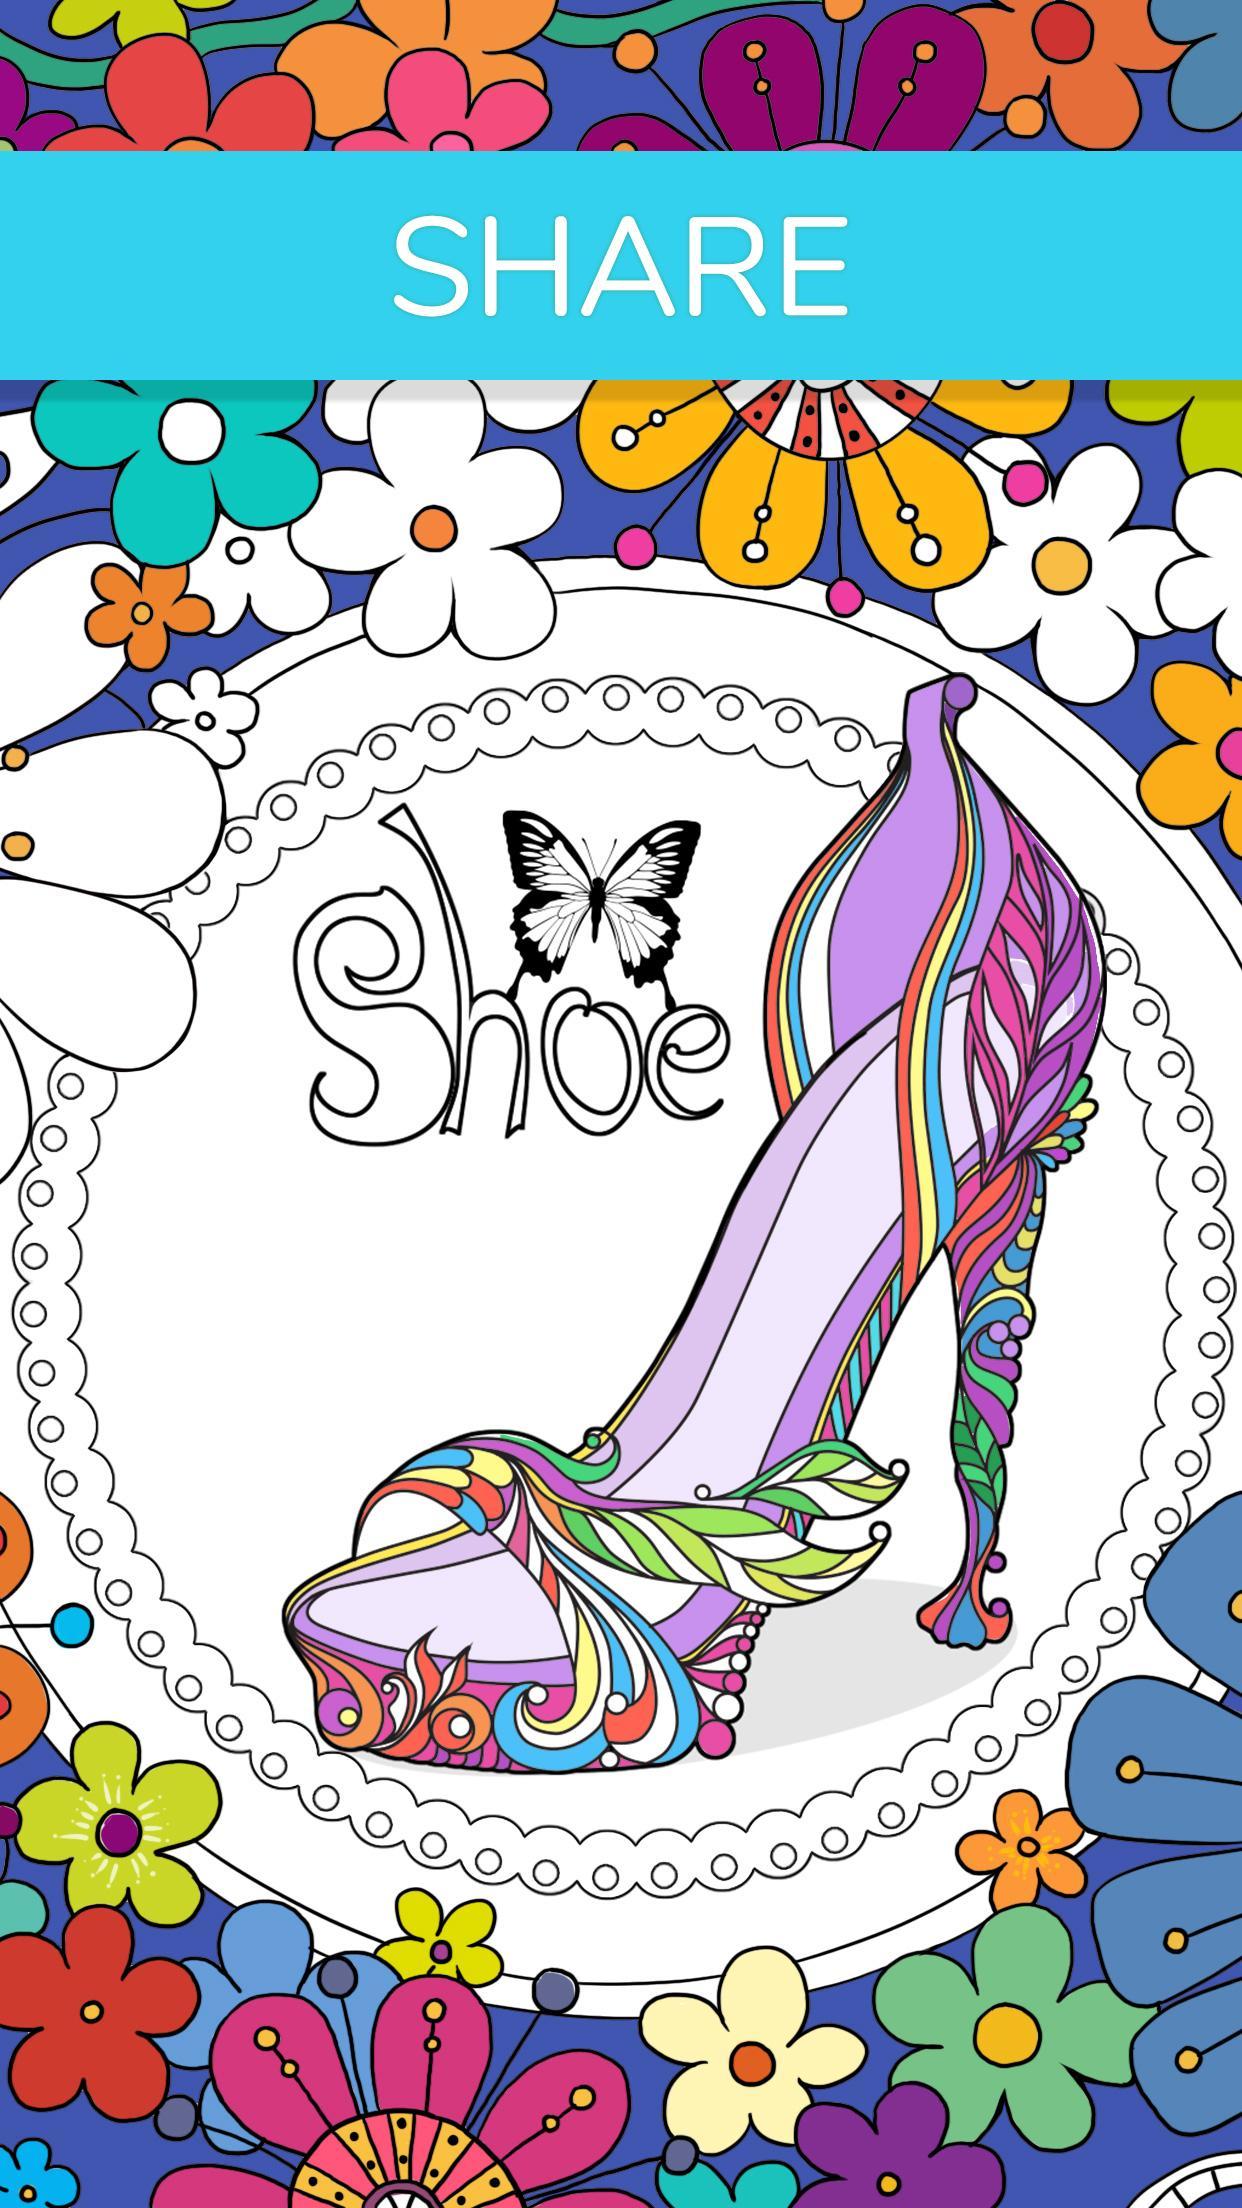 Download Free Coloring Book for Adults App for Android - APK Download